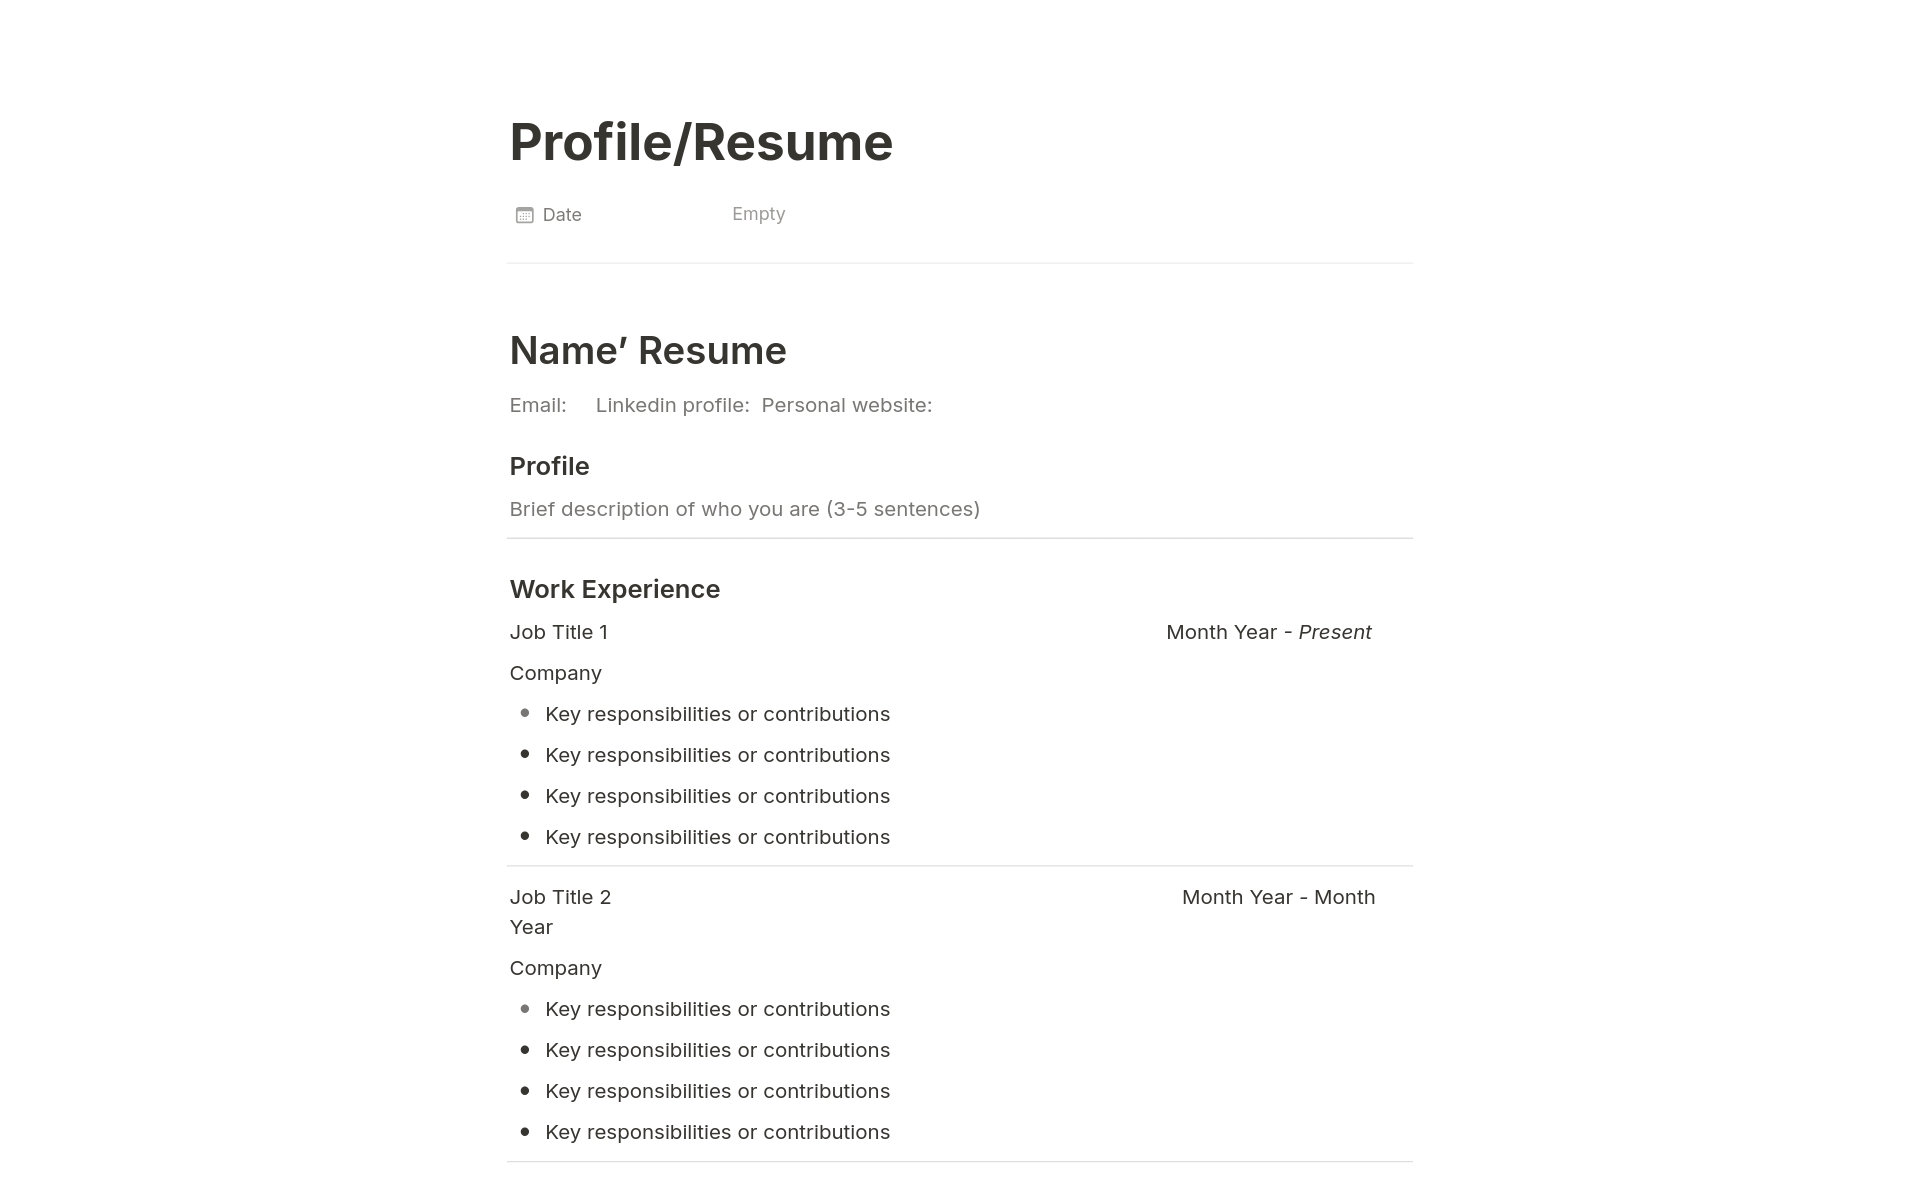 A simple website landing page with brief description of you, resume, publication/work and public posts.